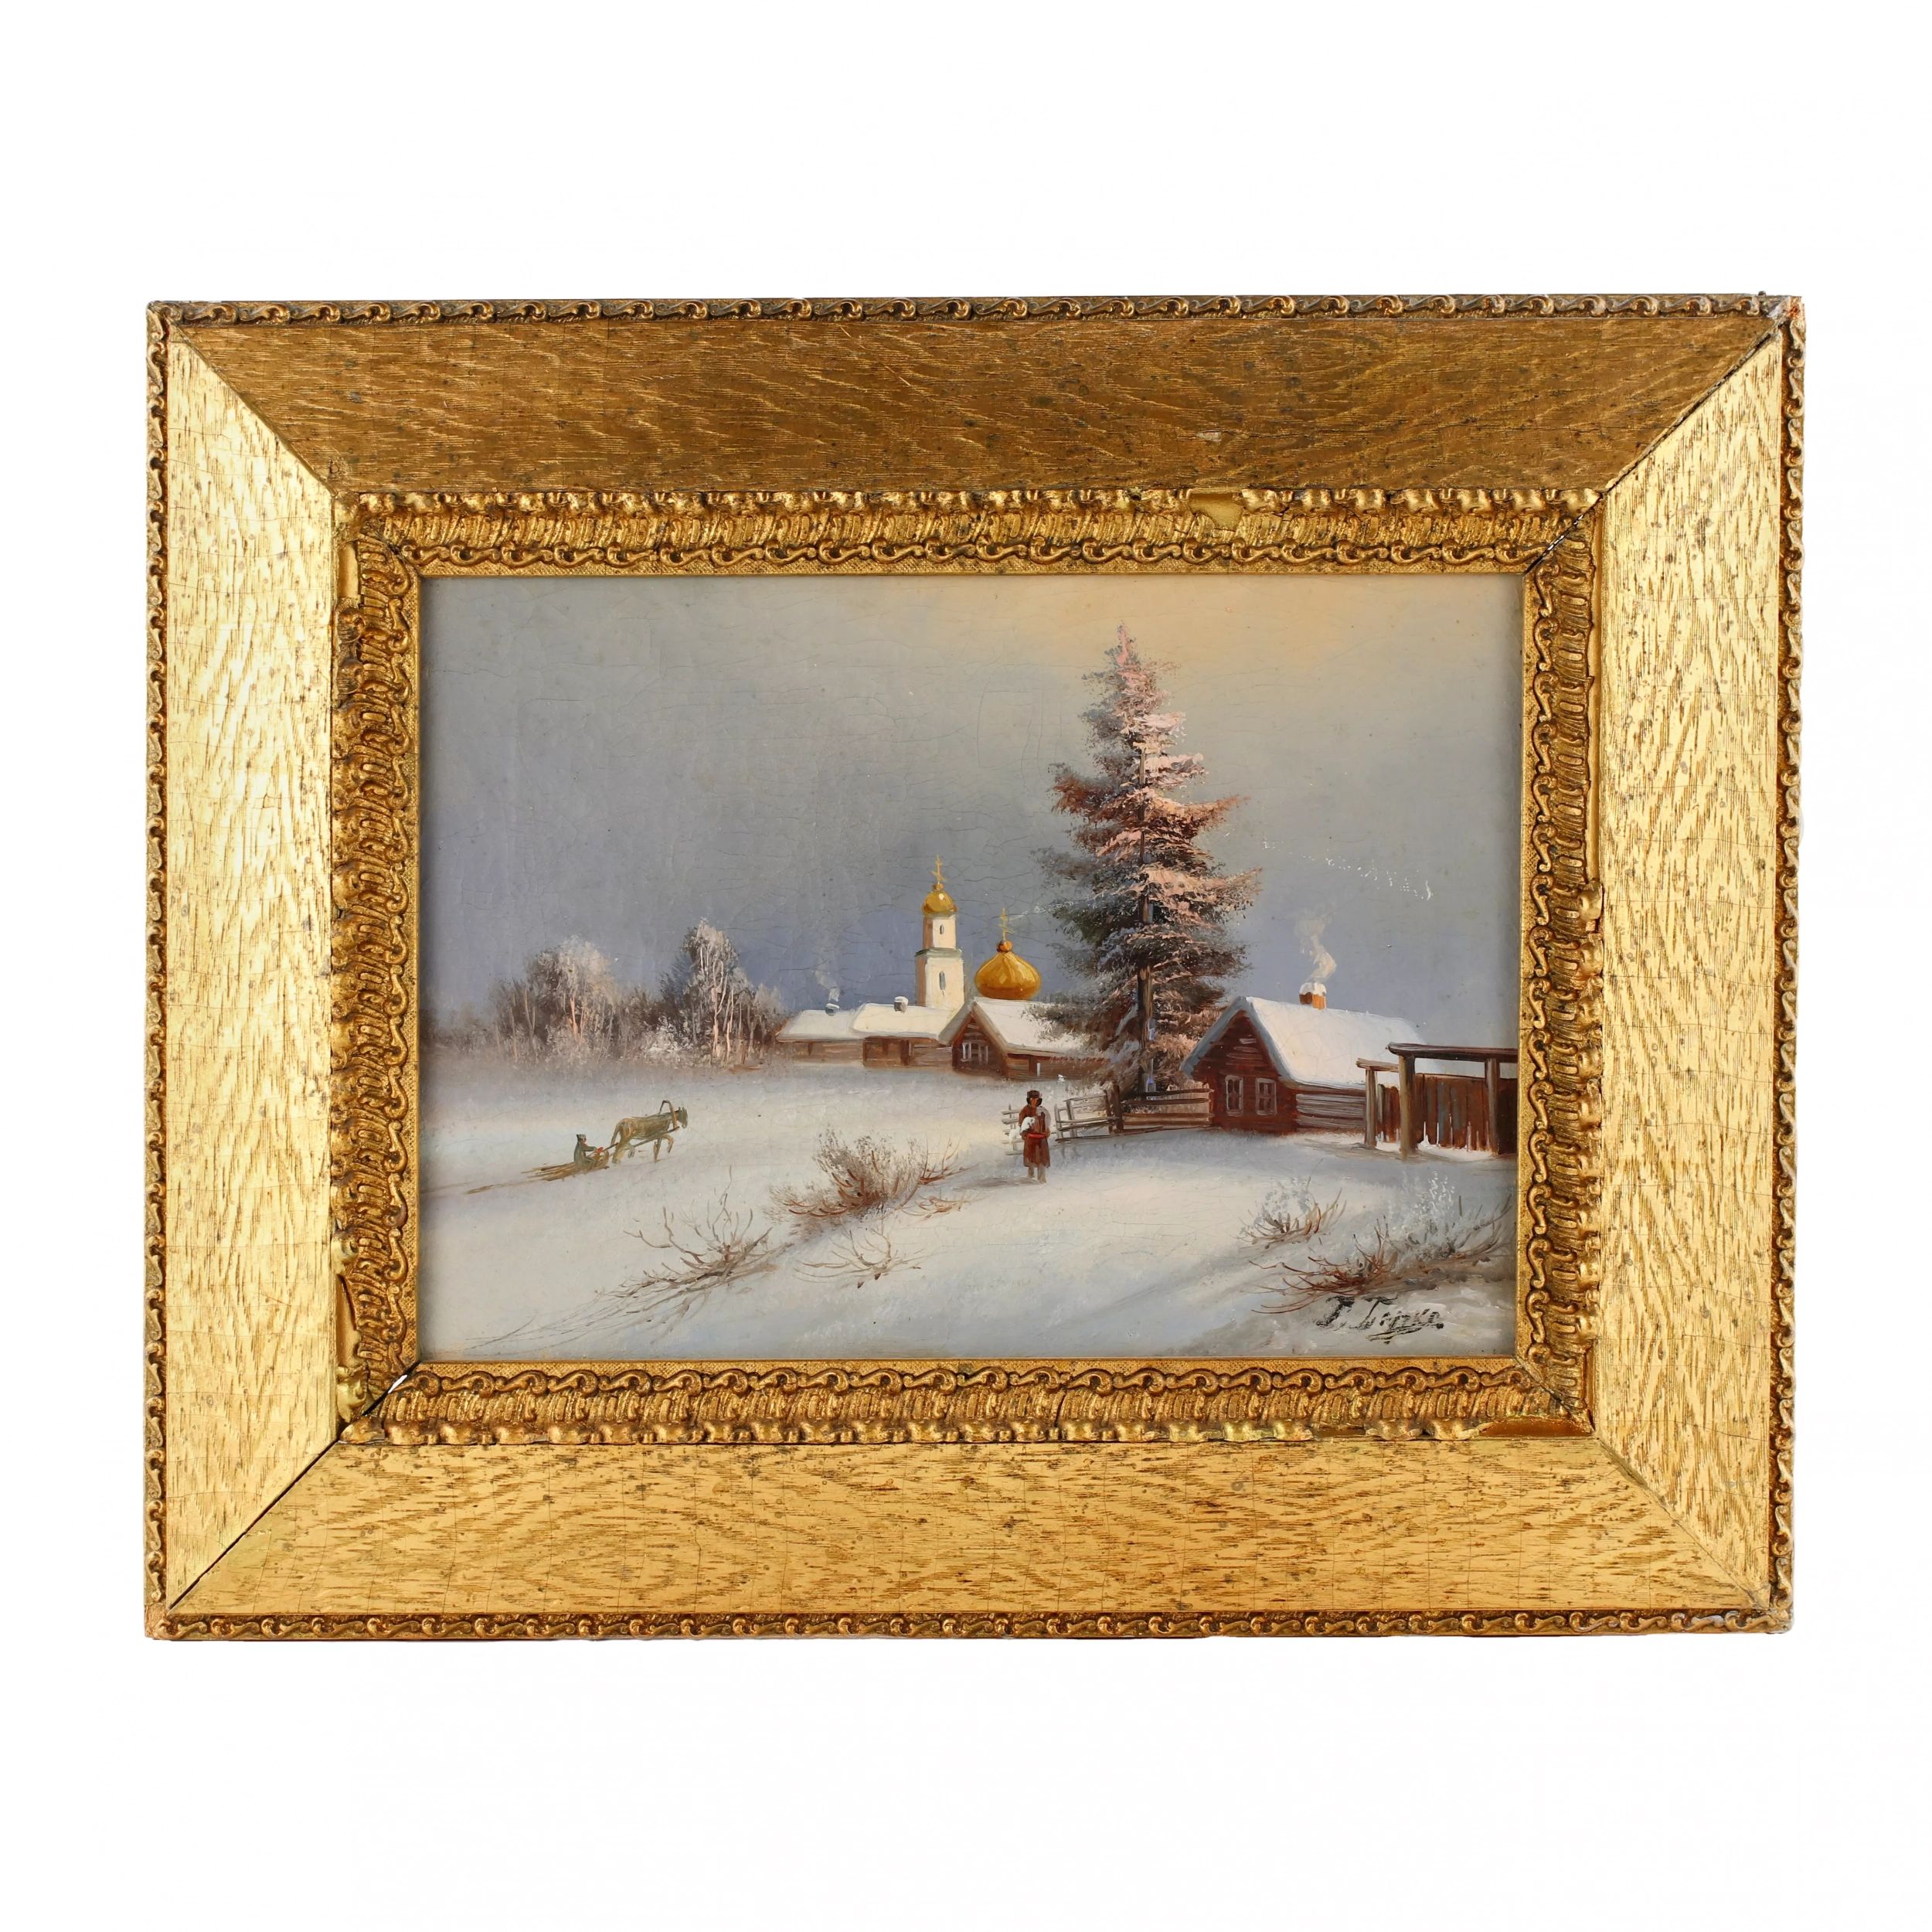 Winter-landscape-with-a-view-of-a-Russian-village-19th-century-